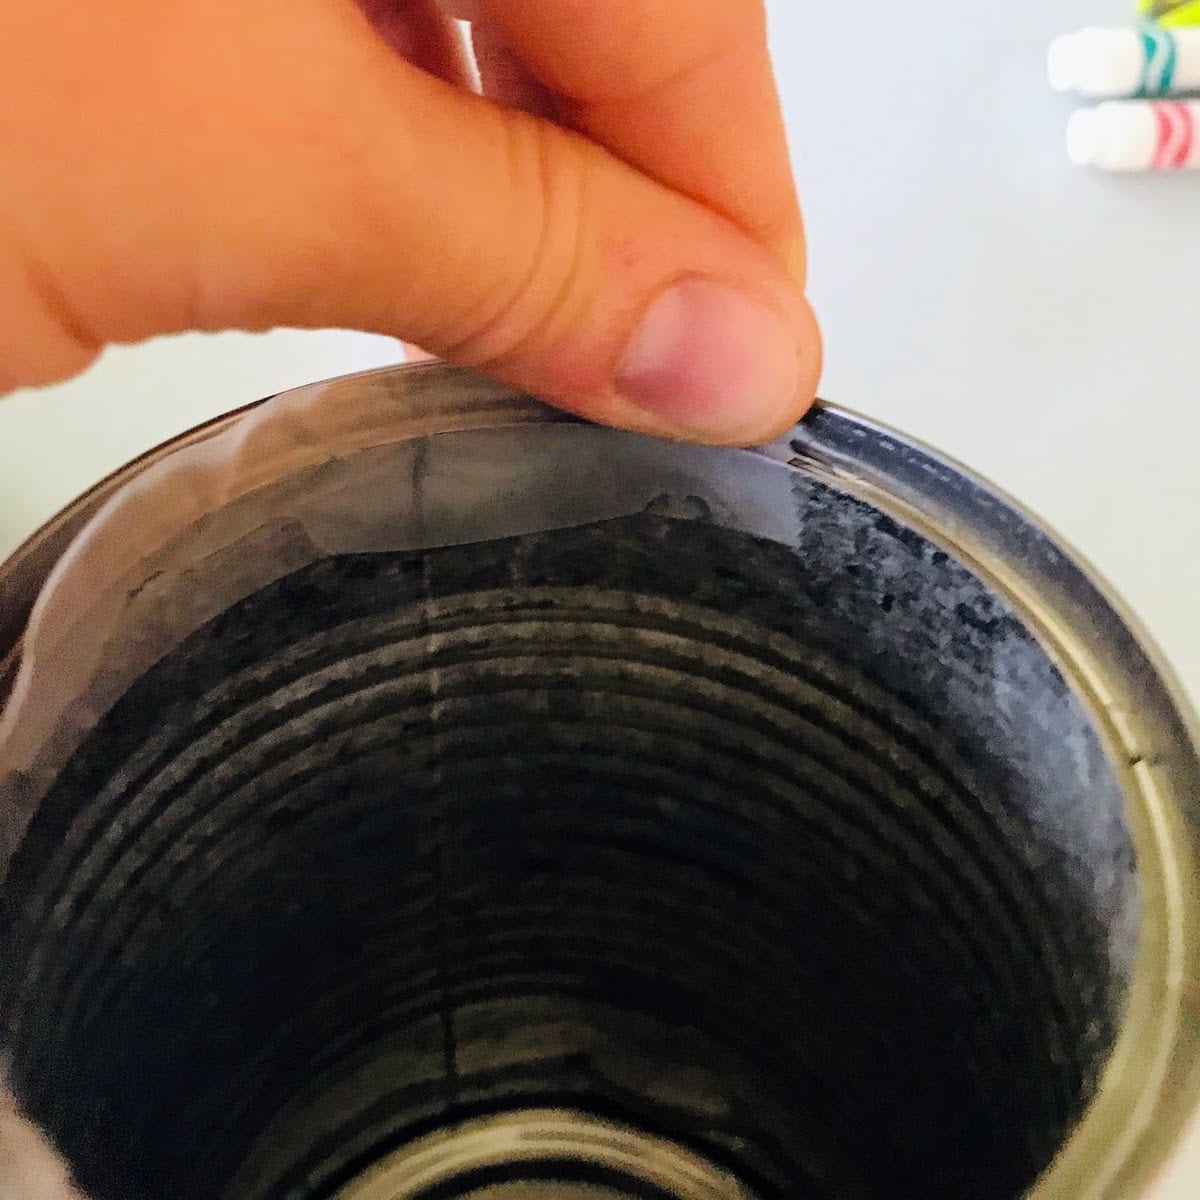 adding tape to the inner rim of a can